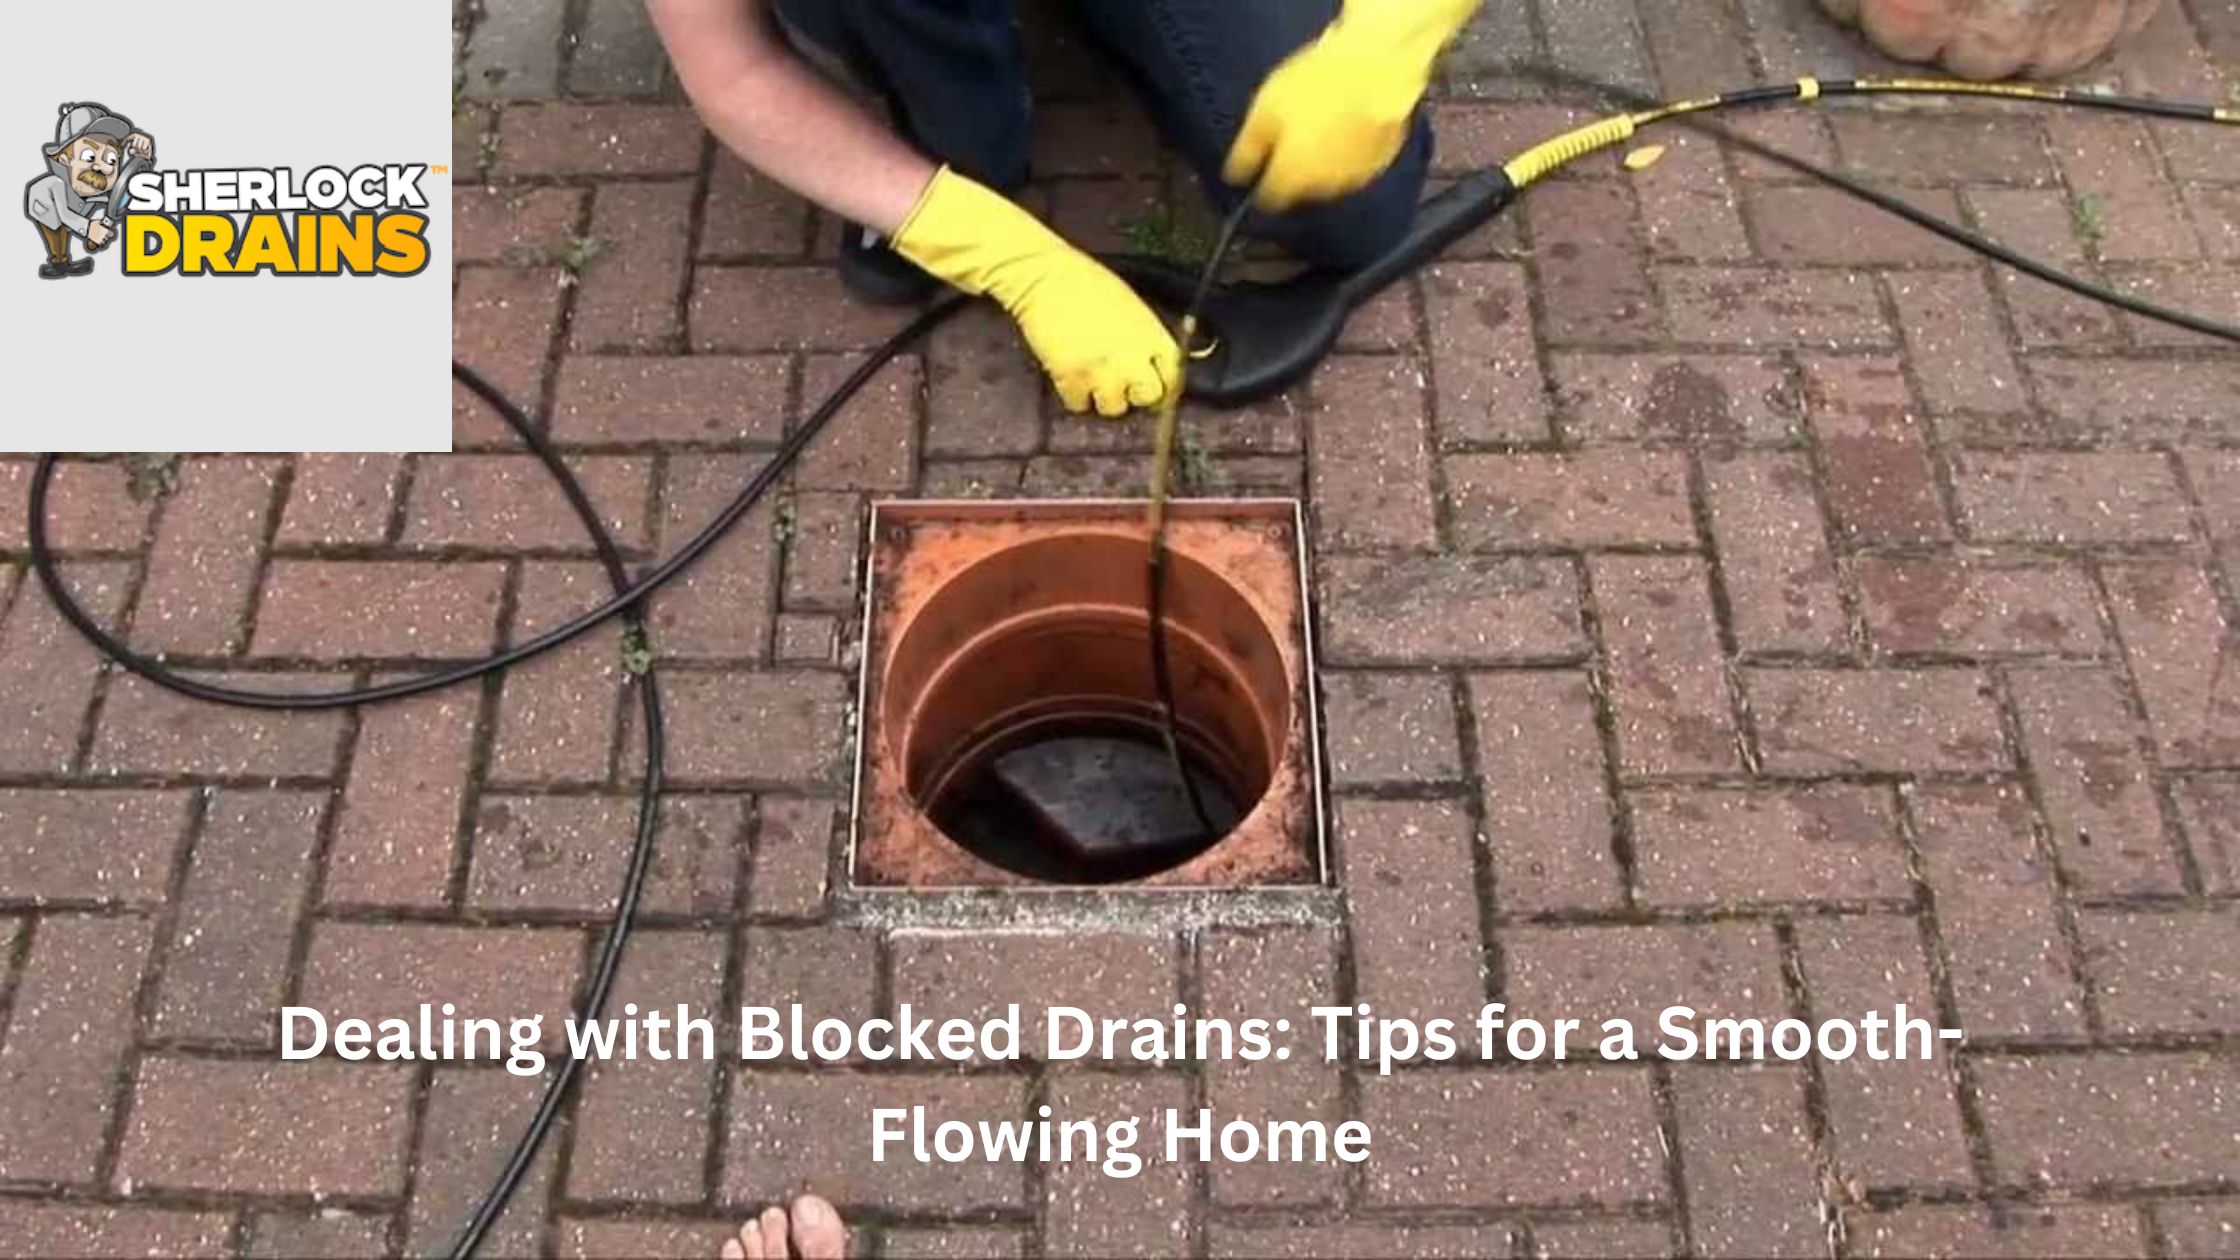 Dealing with Blocked Drains Tips for a Smooth-Flowing Home